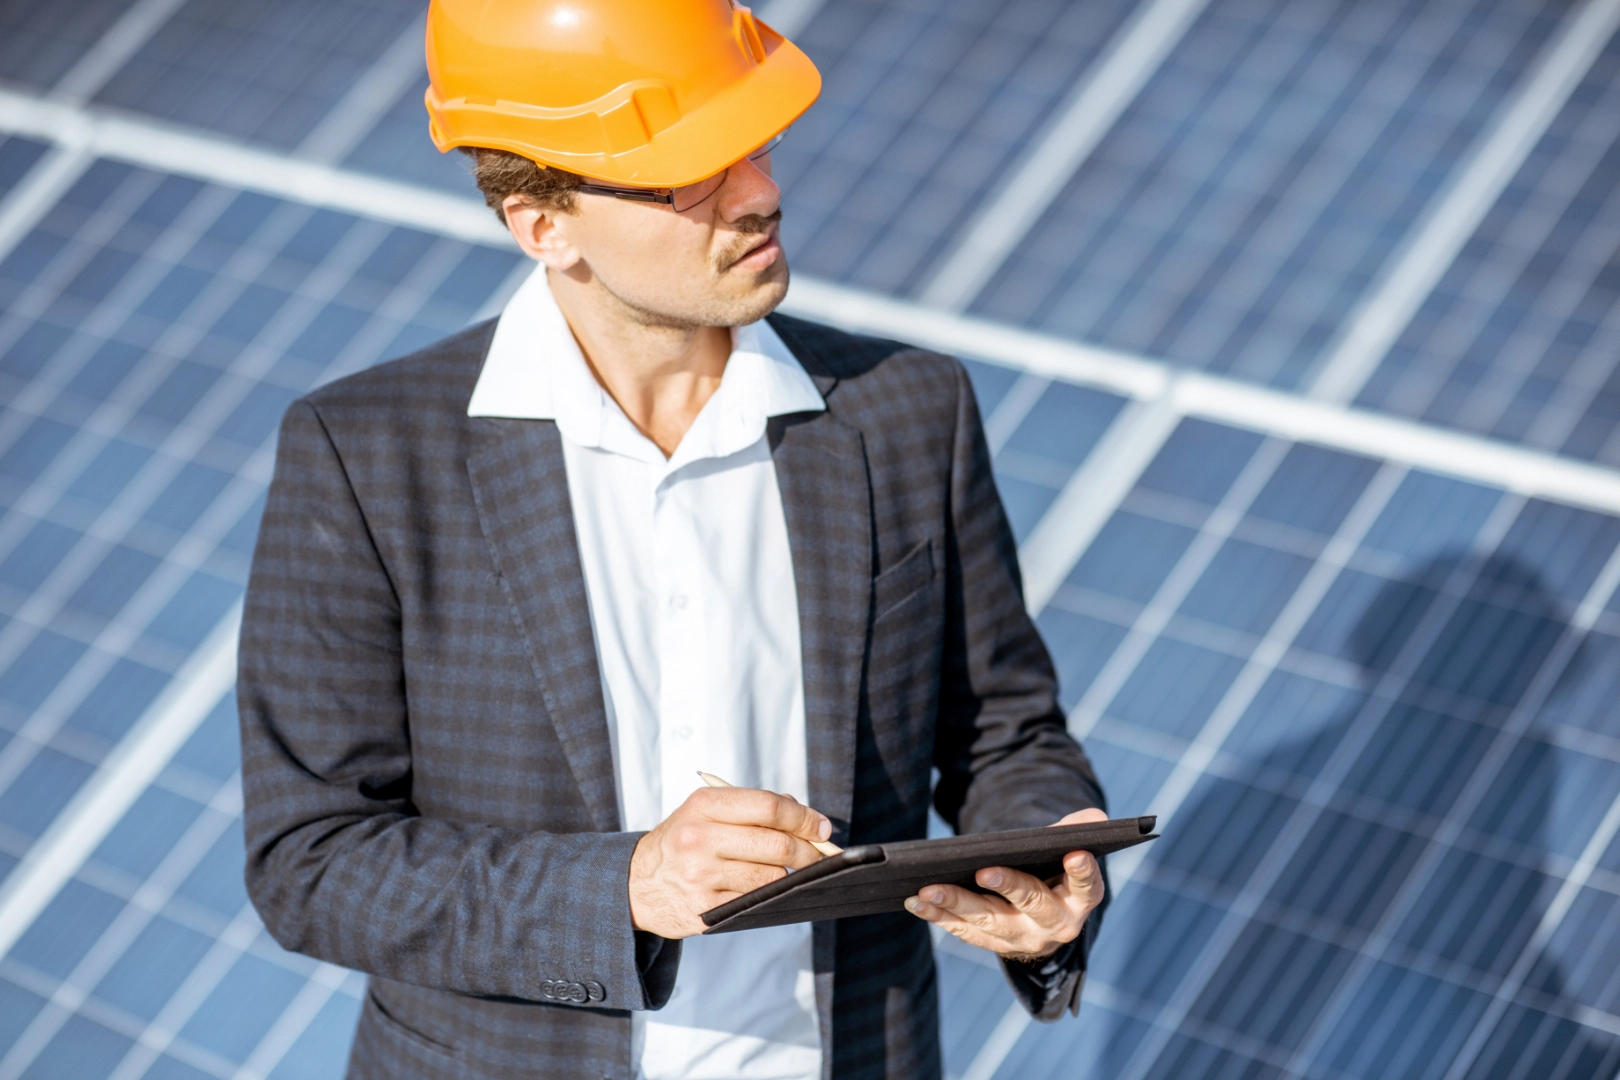 Business man in construction hat holding ipad and standing in front of solar panels